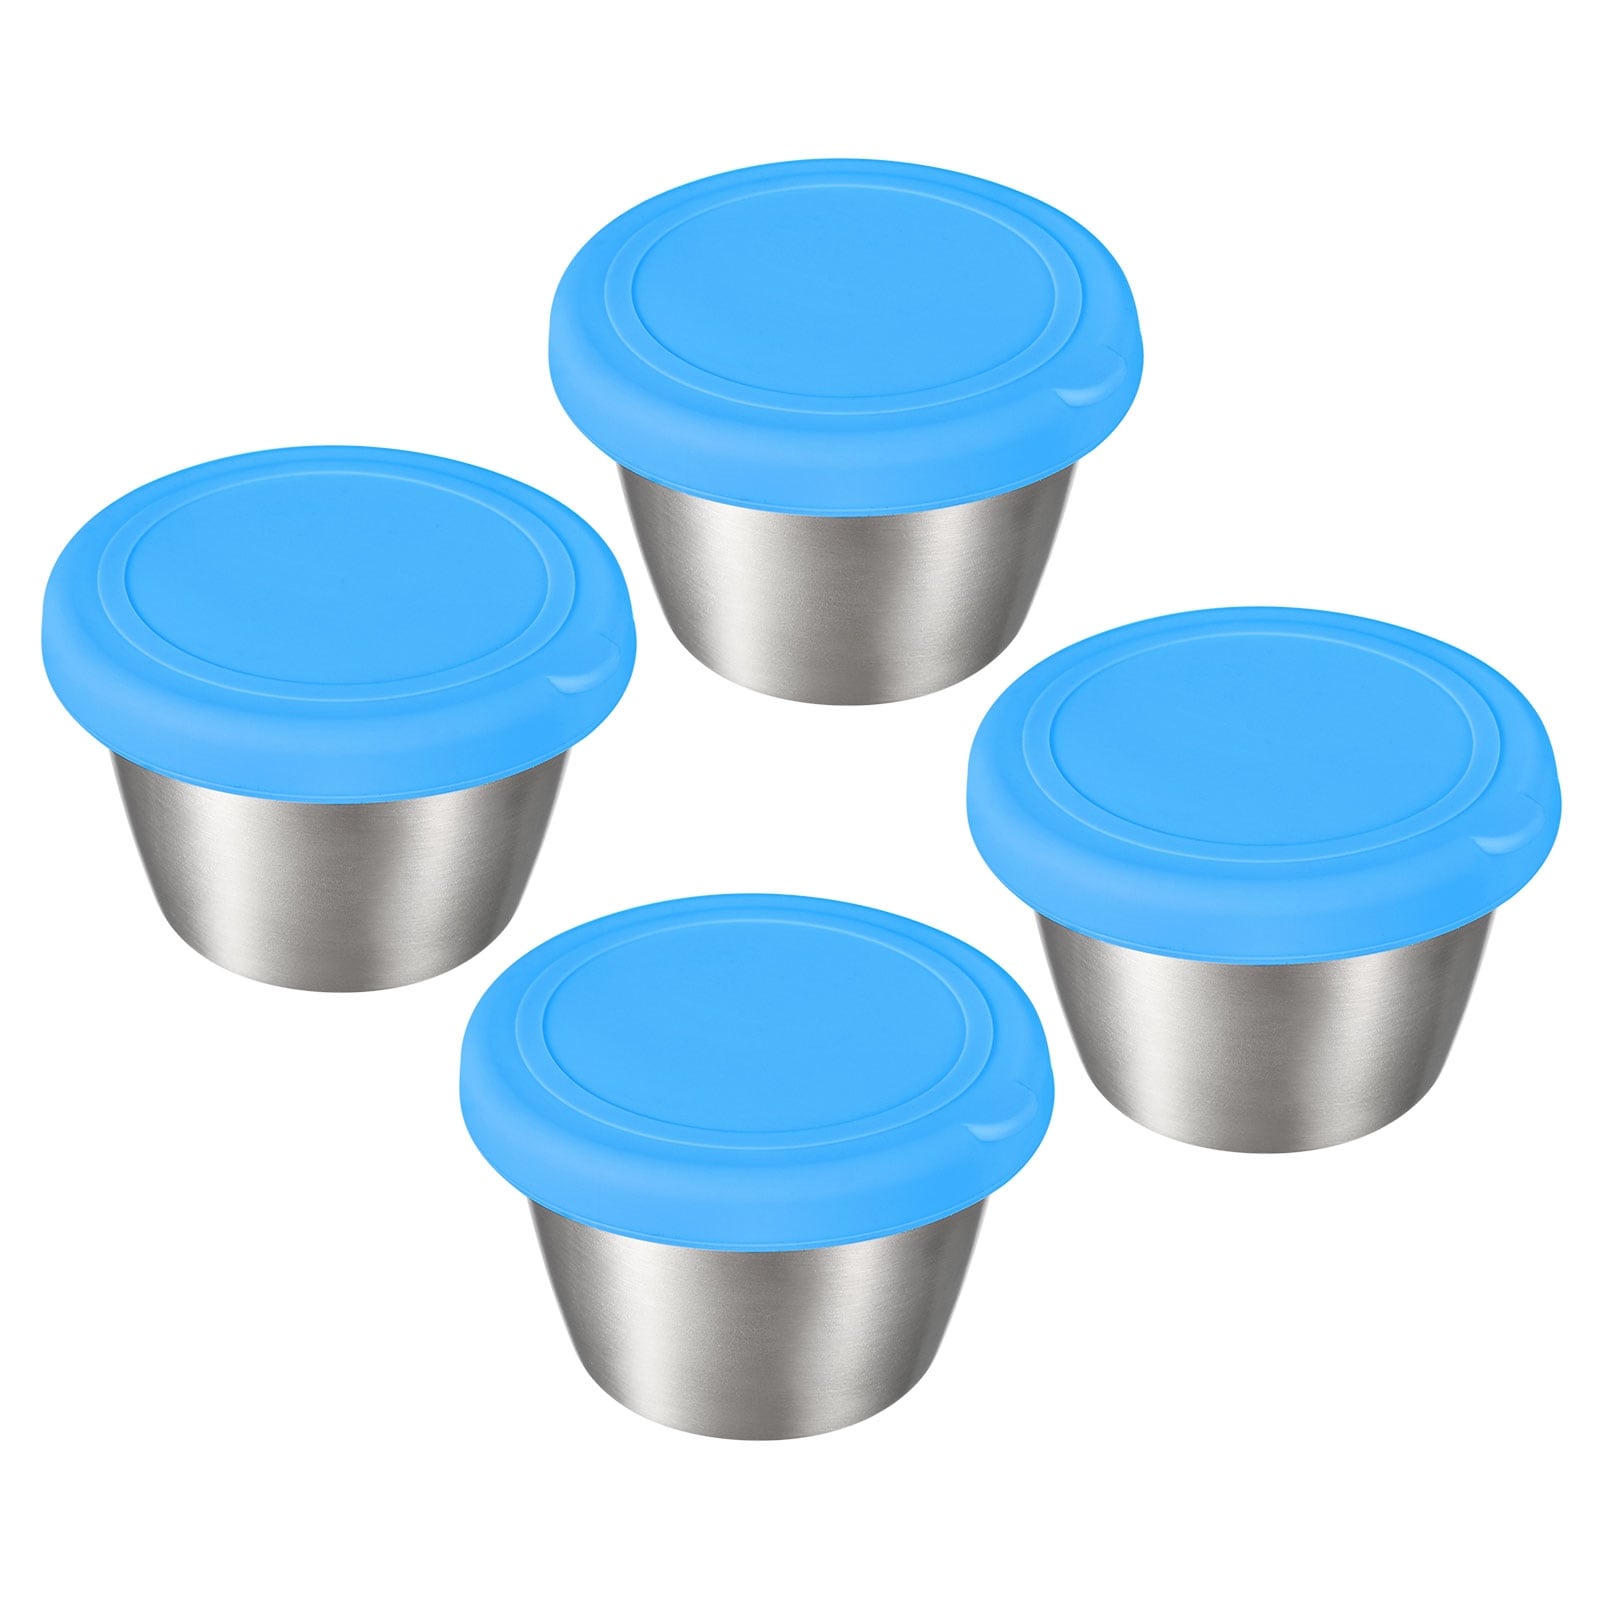 https://ak1.ostkcdn.com/images/products/is/images/direct/744fb61accac3ad74839fd2f388a4d3bb87007c8/4pcs-Small-Stainless-Steel-Condiment-Containers-Cups-for-Bento-Box.jpg